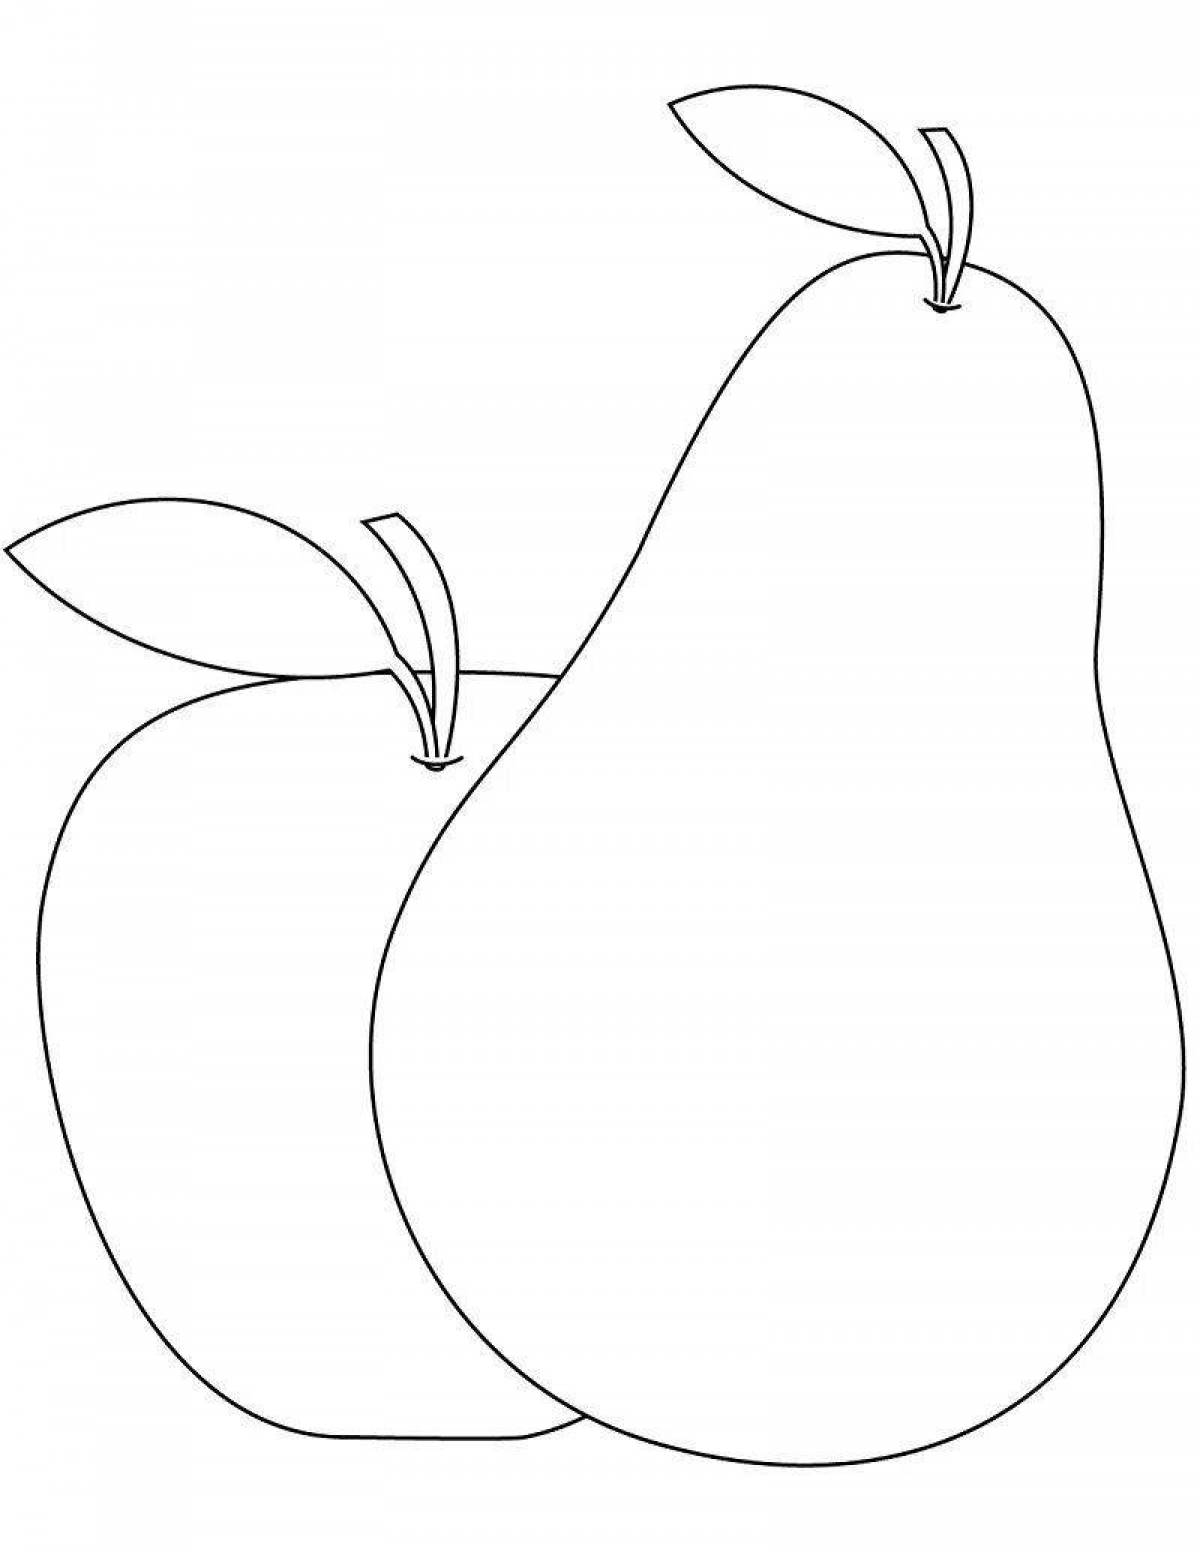 Colorful apple and pear coloring book